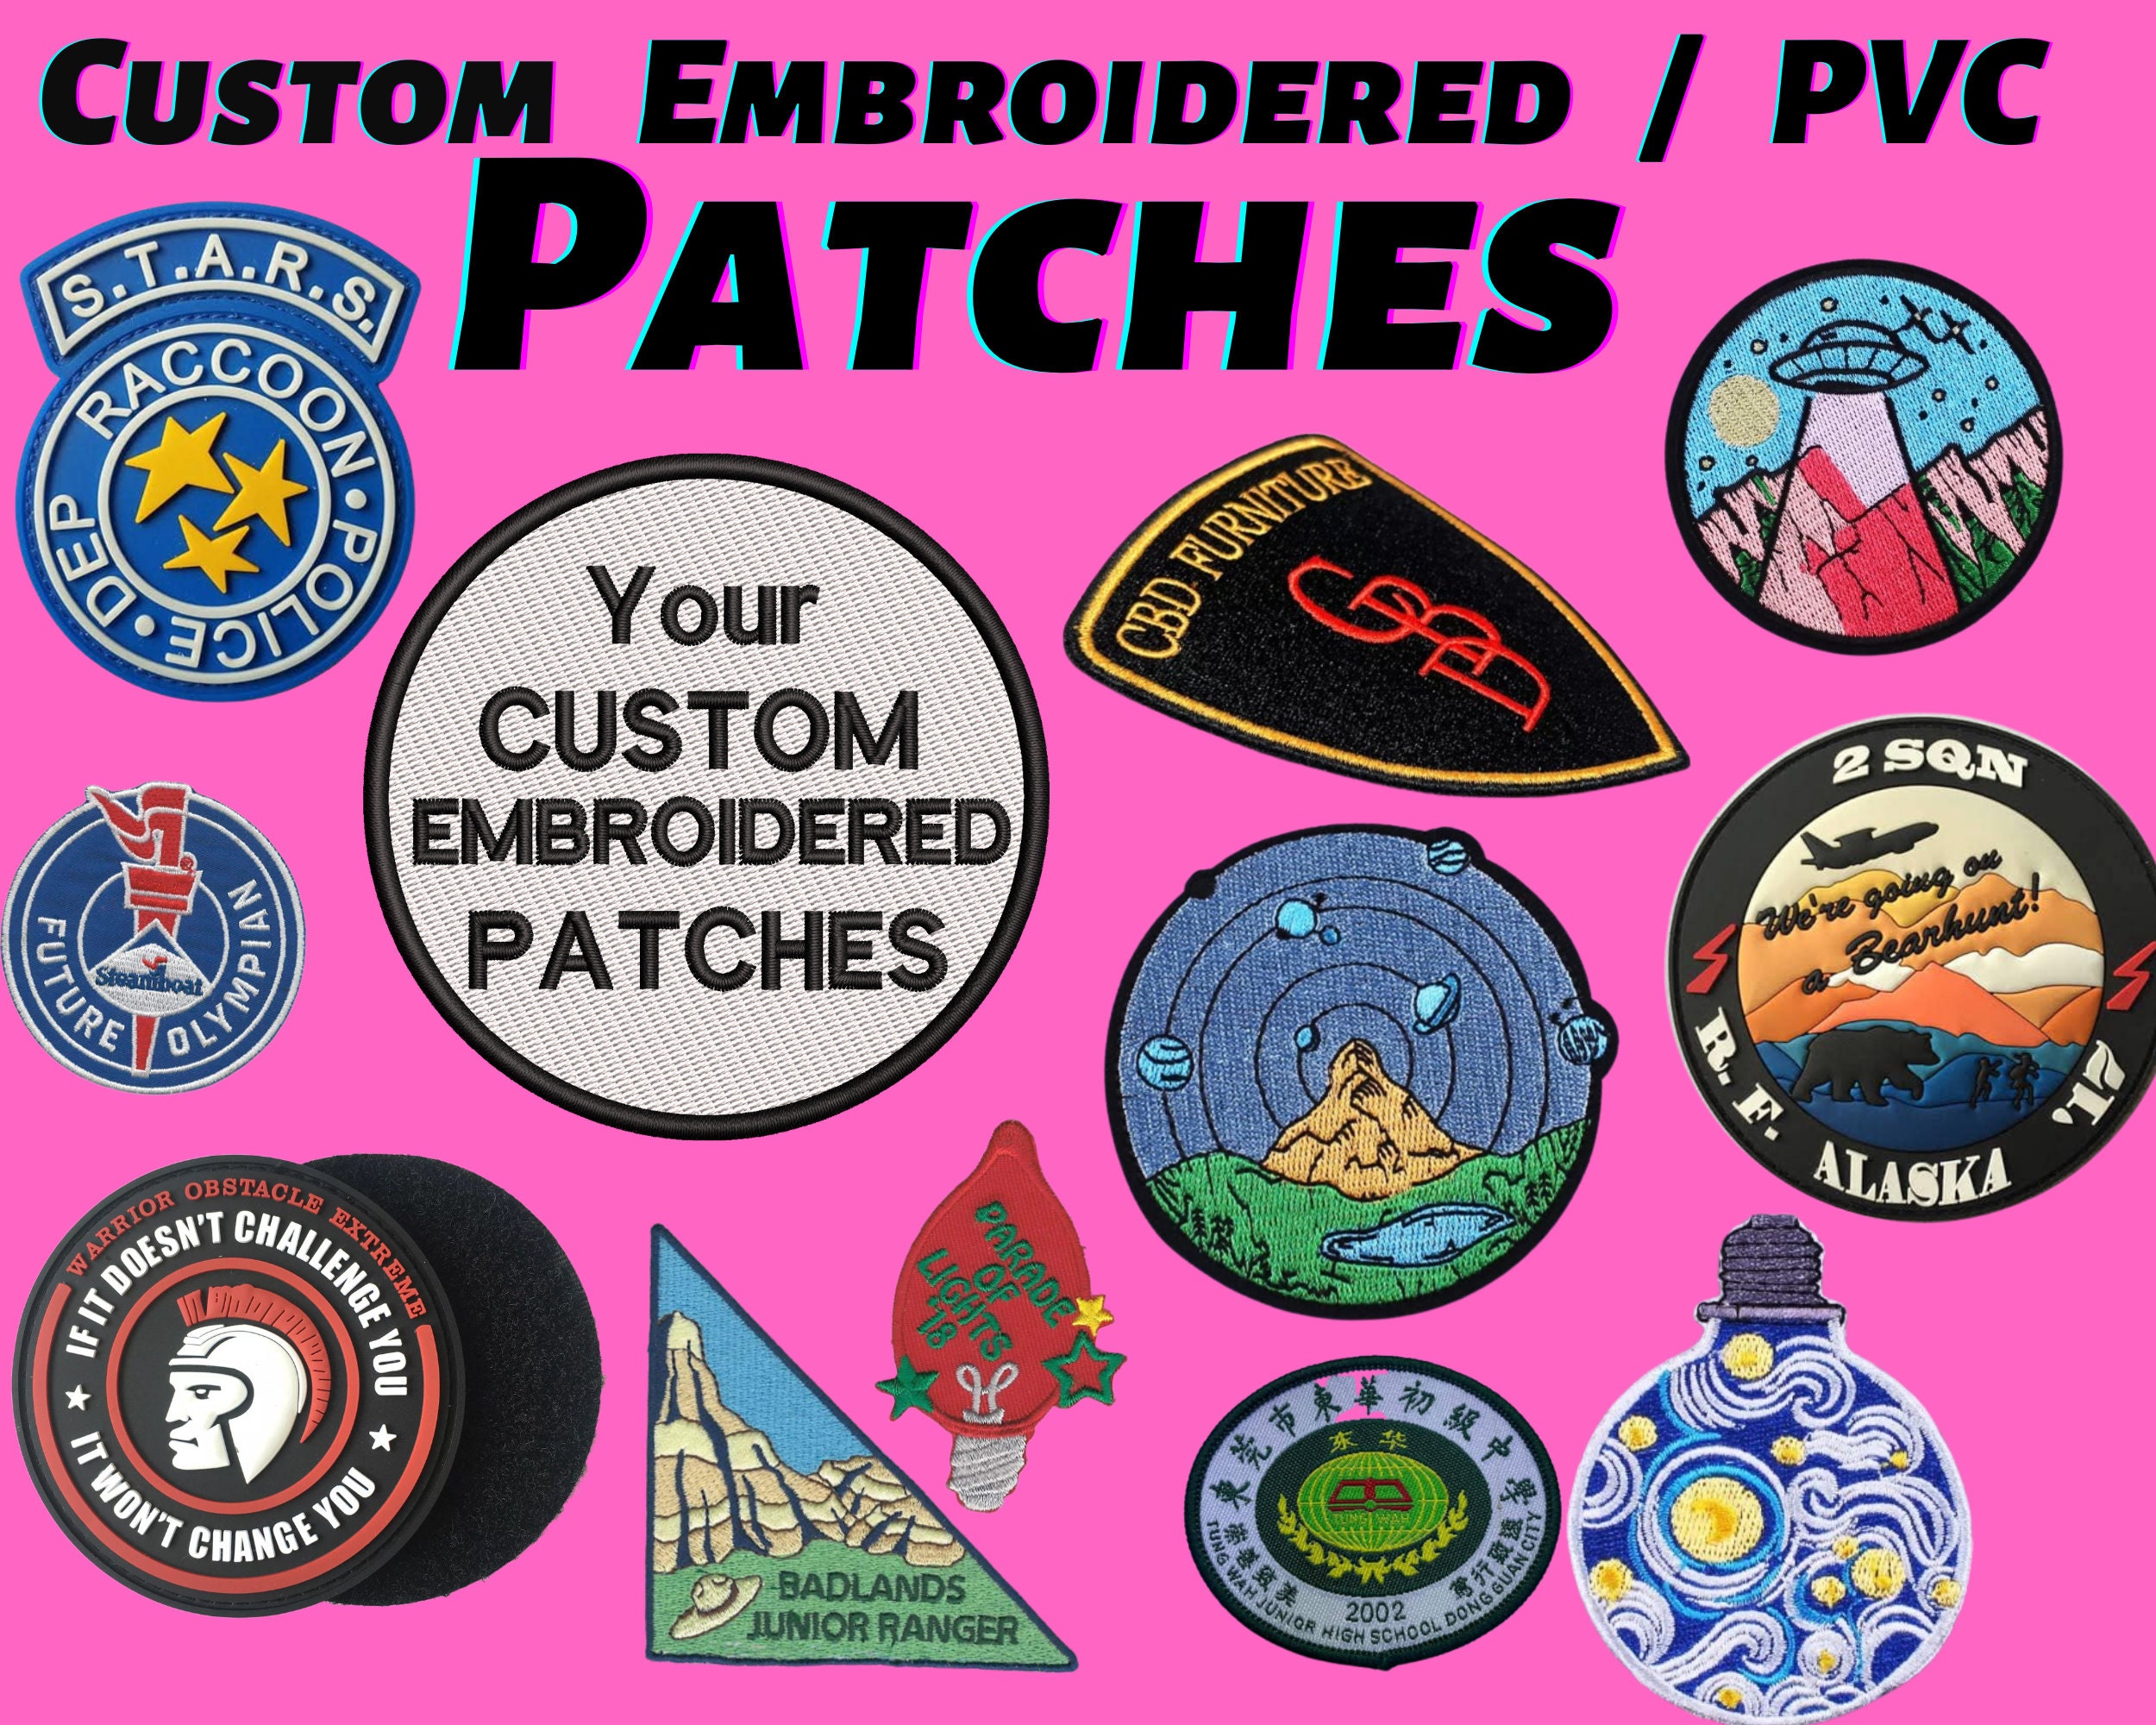 Add-a-patch Extreme Magnetic Morale Patch Holder With Loop Velcro and  Neodymium Magnets, 4 Sizes: 2x2, 2x3, 3x4 & 3 Circle 